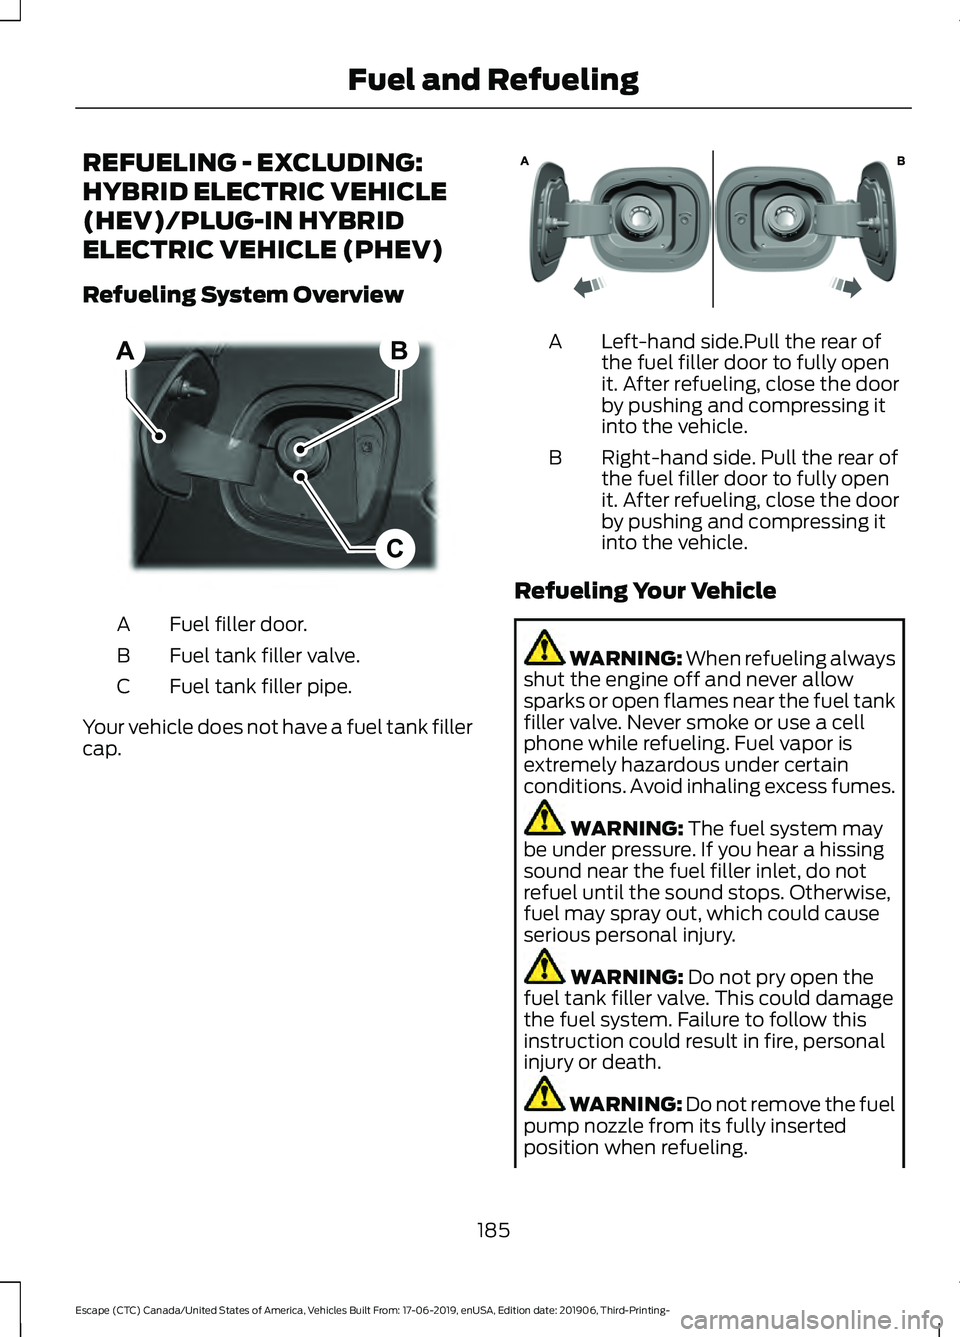 FORD ESCAPE 2020  Owners Manual REFUELING - EXCLUDING:
HYBRID ELECTRIC VEHICLE
(HEV)/PLUG-IN HYBRID
ELECTRIC VEHICLE (PHEV)
Refueling System Overview
Fuel filler door.
A
Fuel tank filler valve.
B
Fuel tank filler pipe.
C
Your vehicl